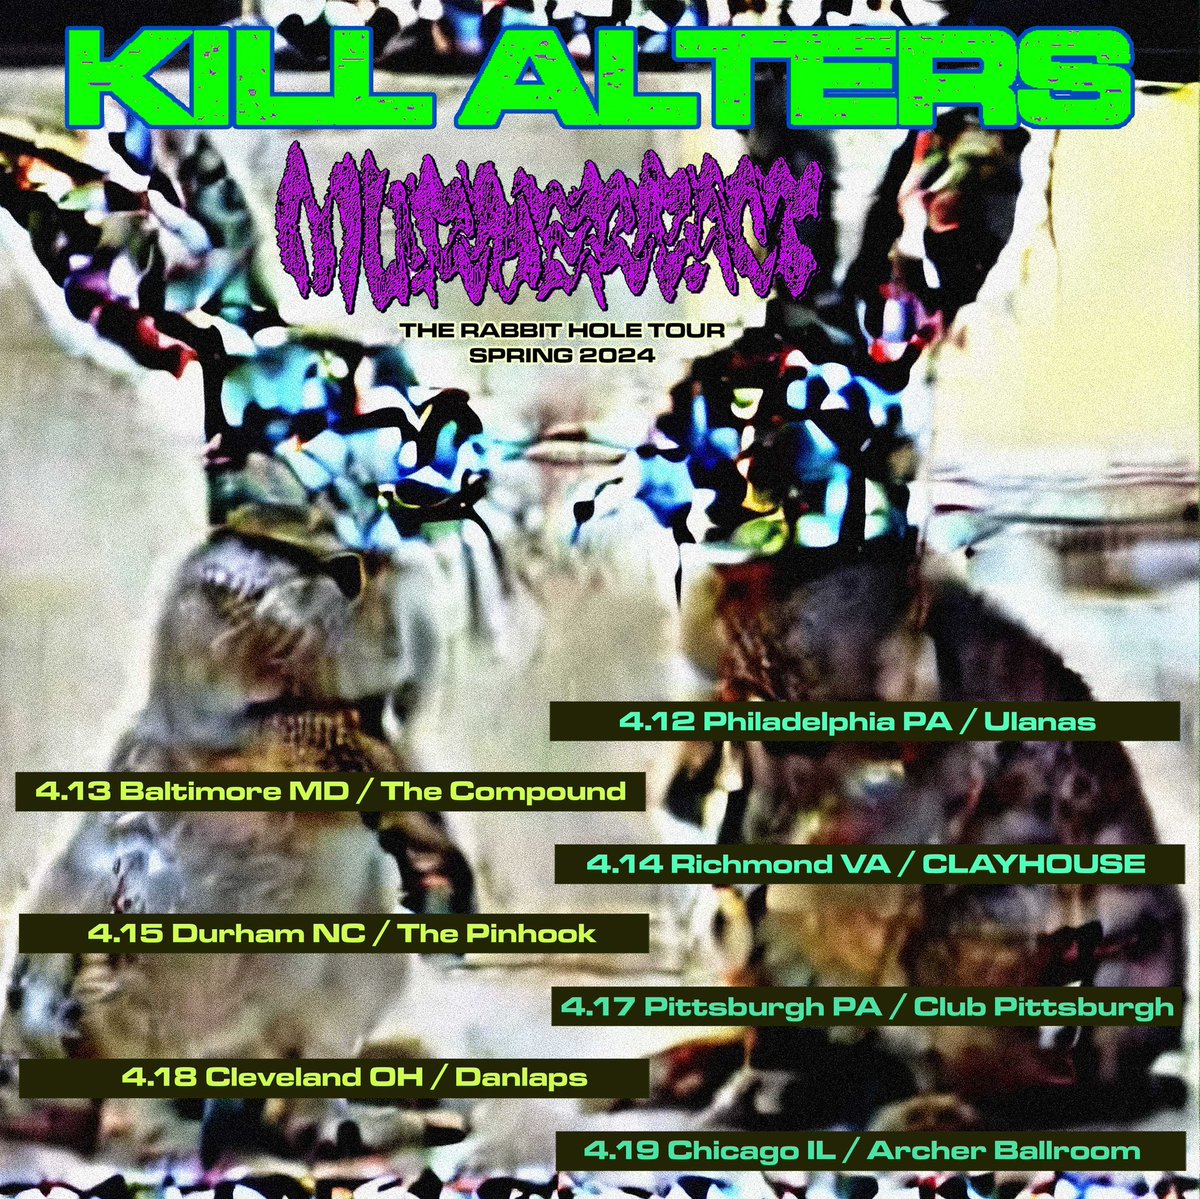 🐇🕳️🐇🕳️🐇🕳️🐇🕳️🐇🕳️🐇🕳️🐇🐇🕳️🕳️🐇🕳️🐇🐇🕳️🐇🕳️🕳️ KILL ALTERS IS HITTING THE ROAD FOR A MINI SPRING TOUR IN APRIL W/ MURDERPACT )))))((((((